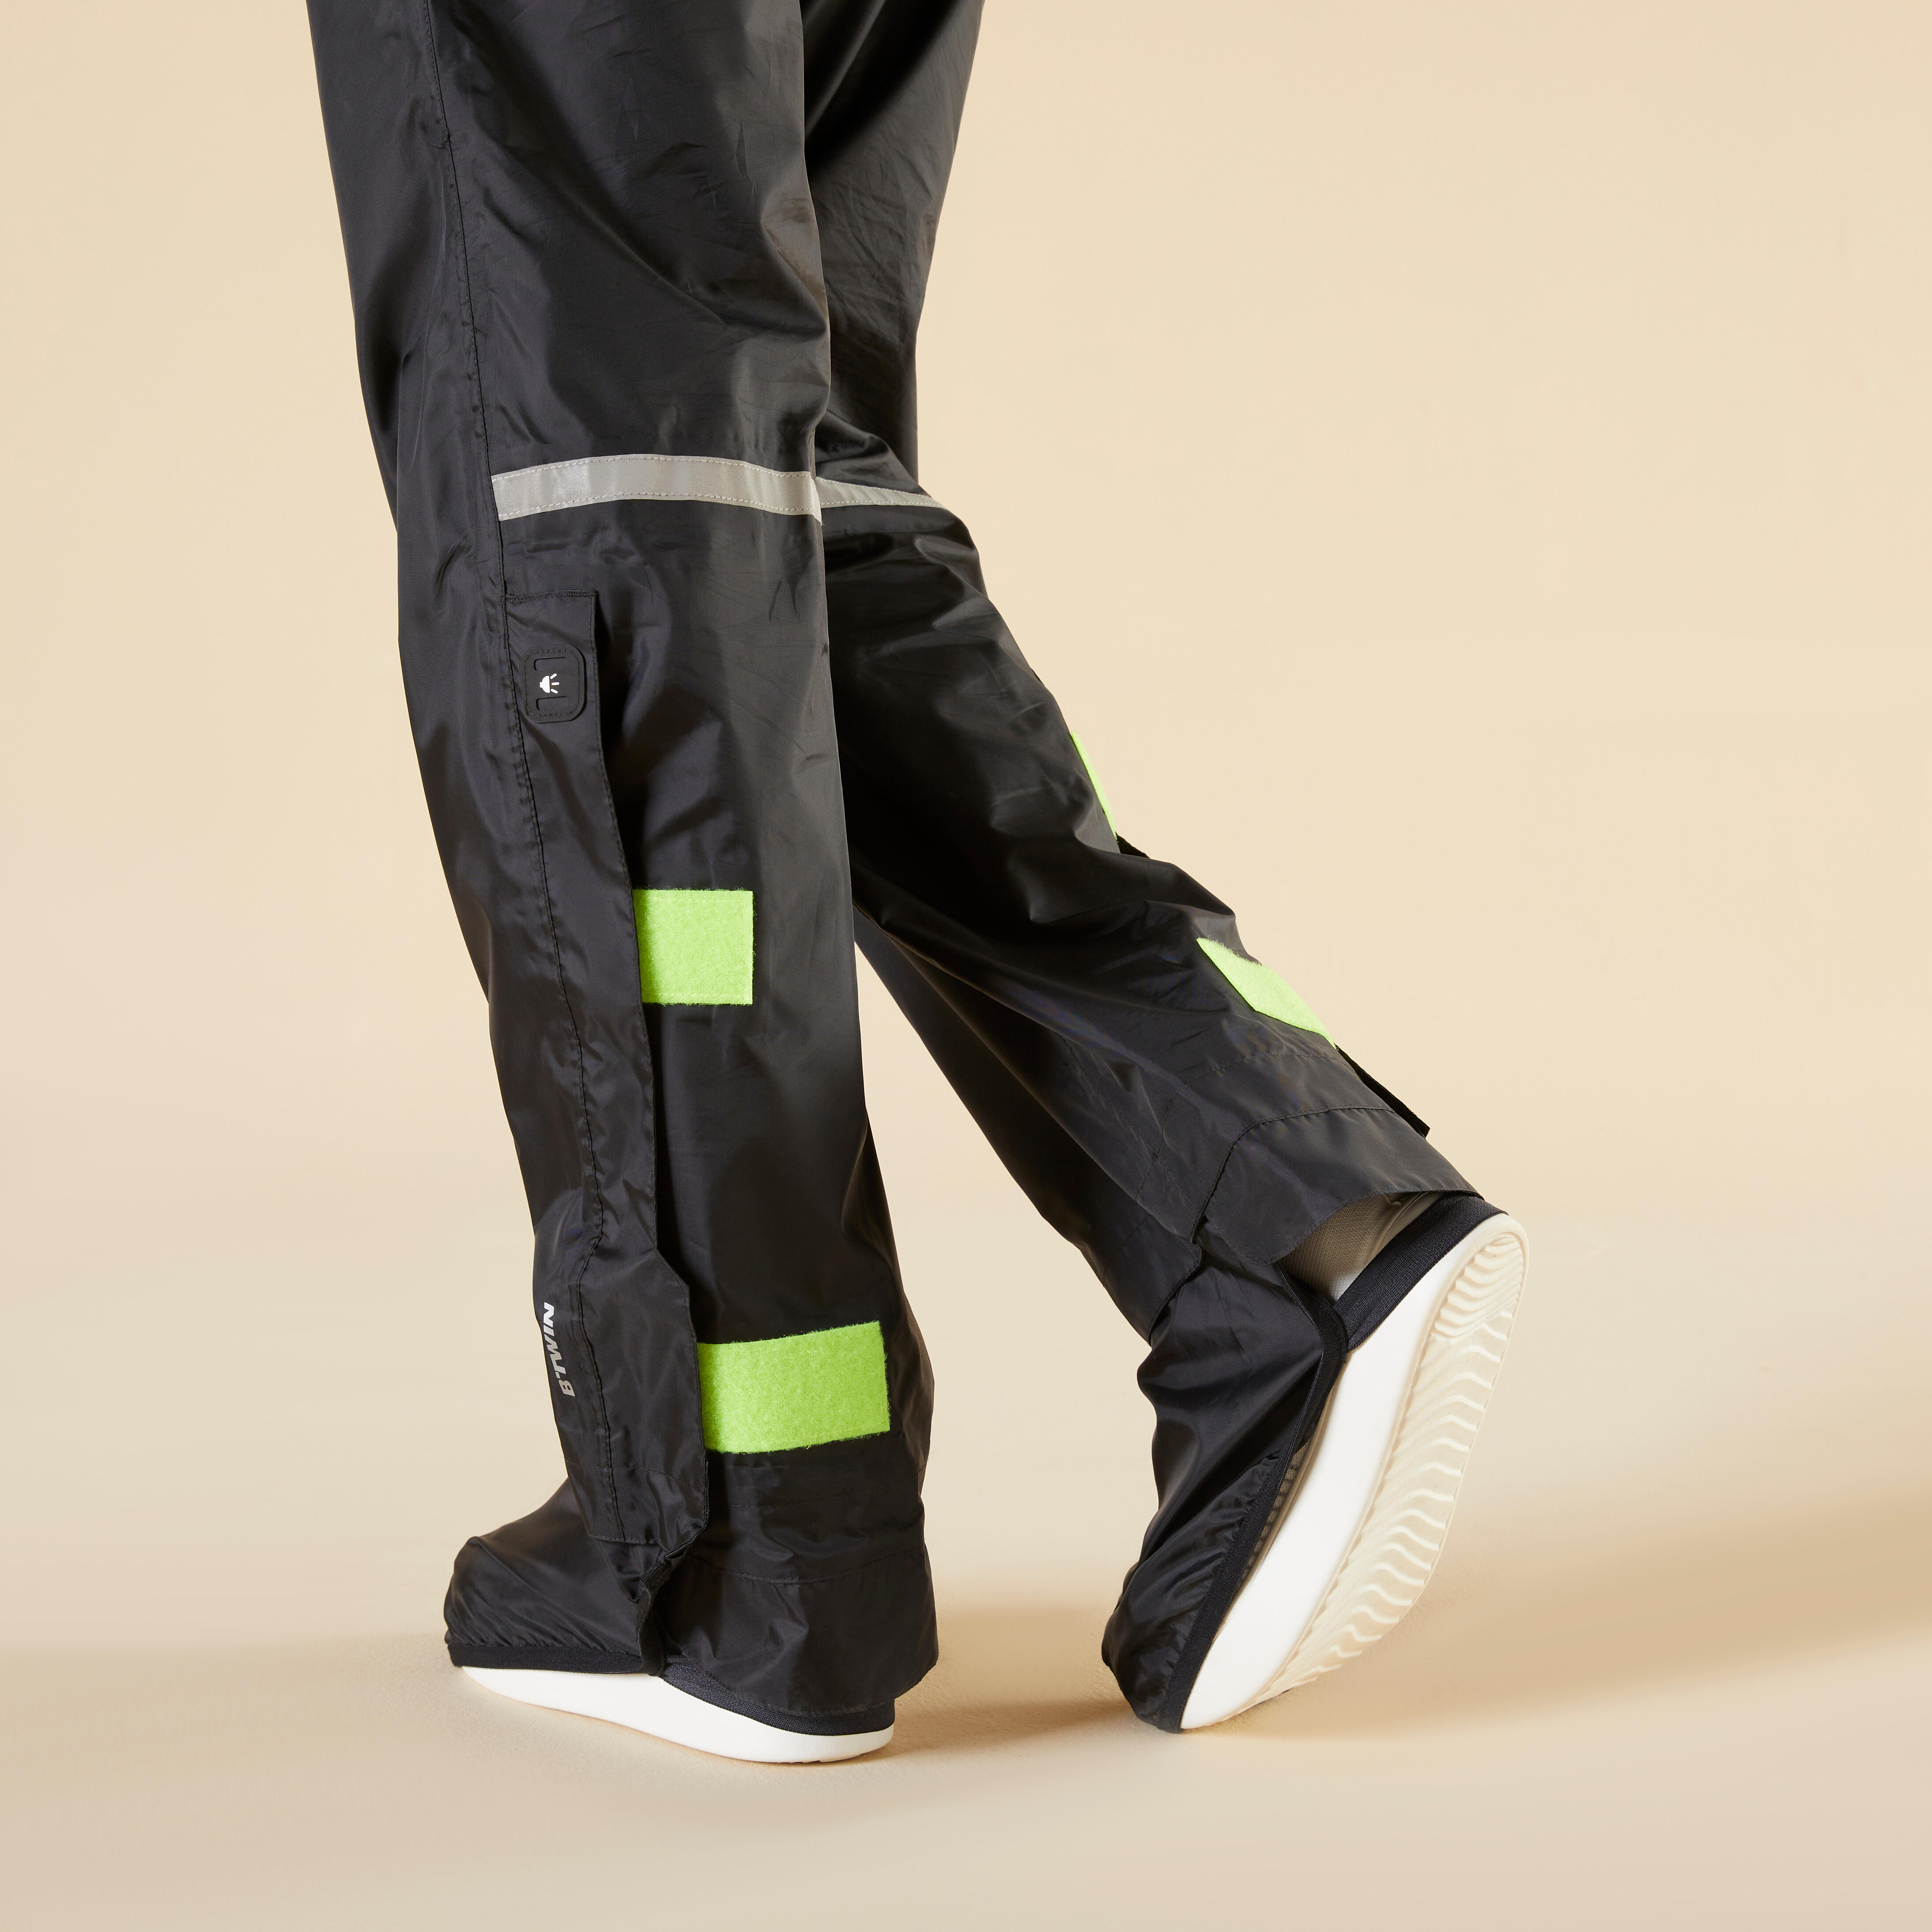 100 city cycling rain overtrousers black